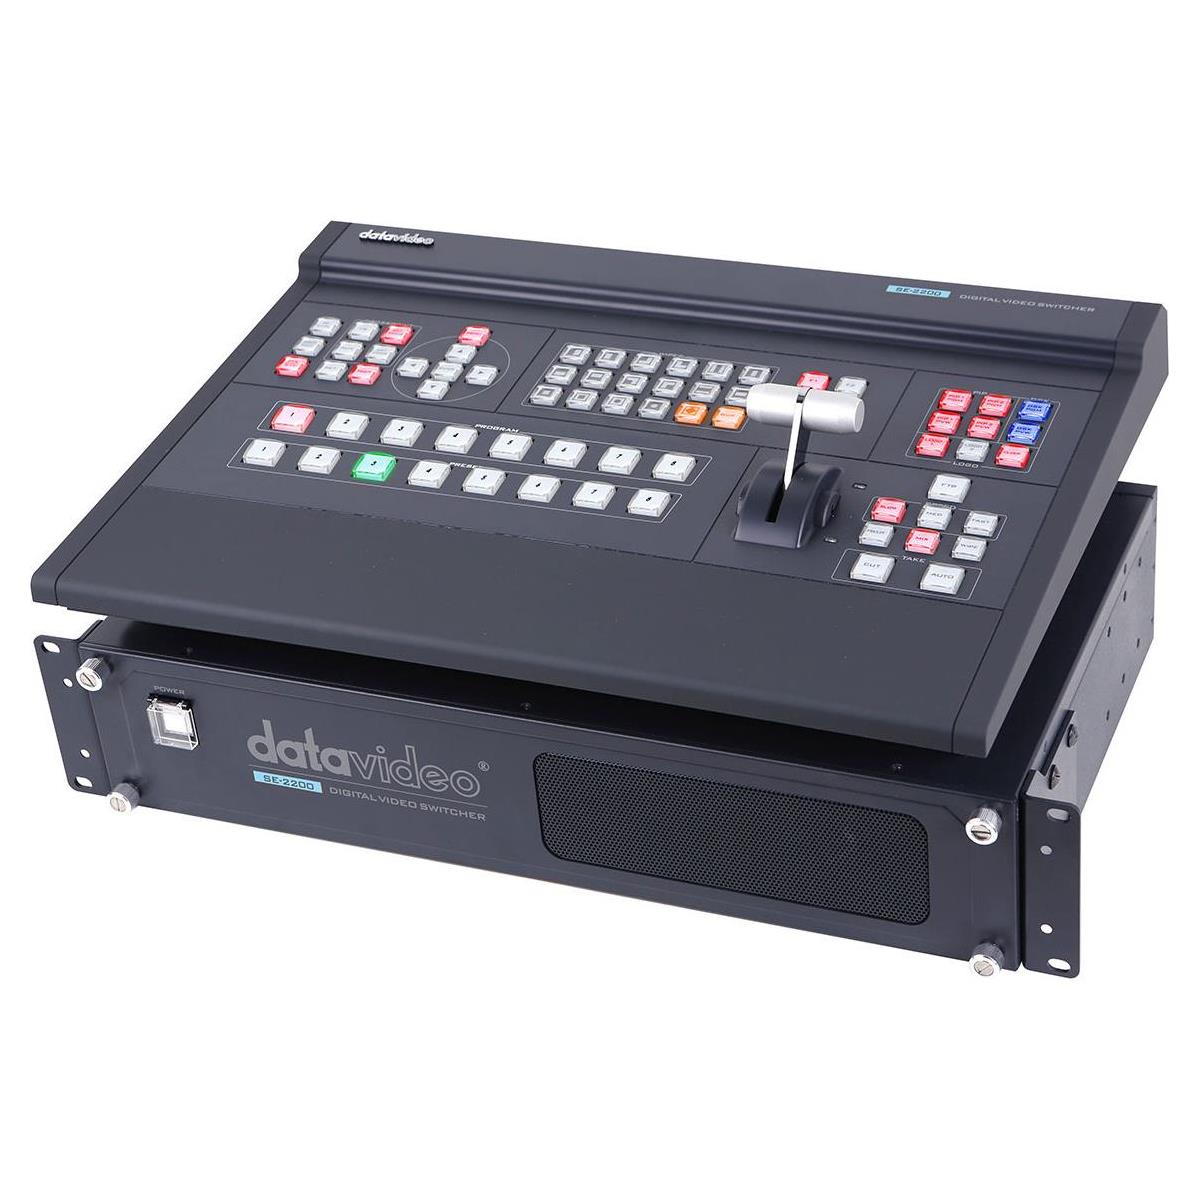 Image of Datavideo SE-2200 6-Input Video Switcher with HD-SDI and HDMI Inputs